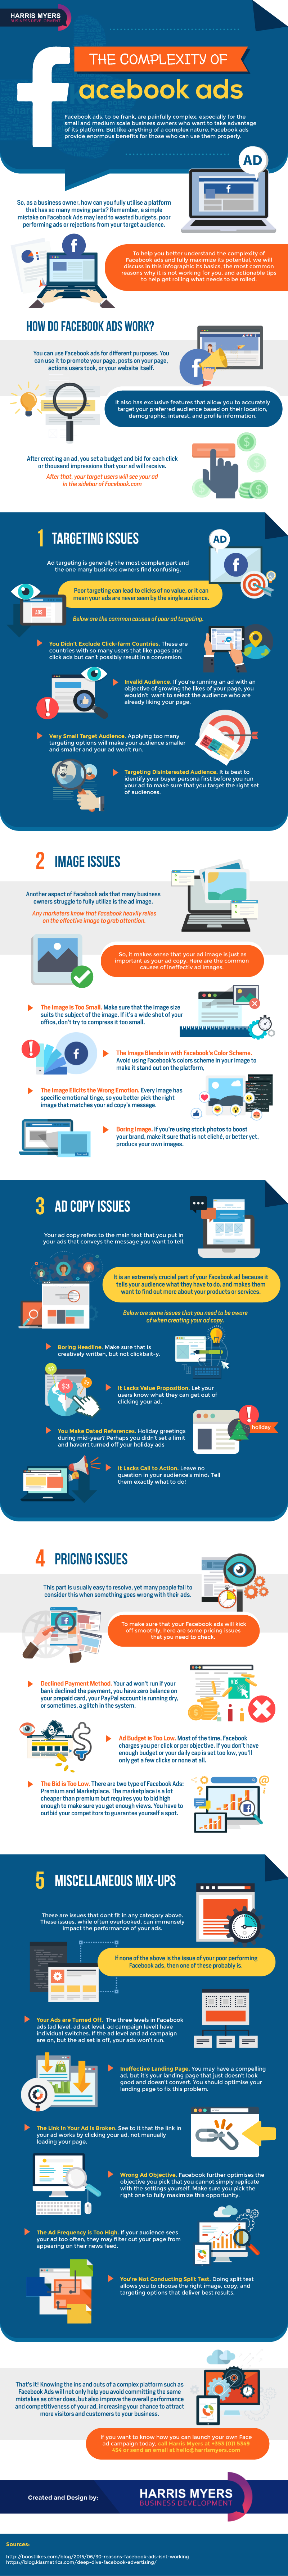 The Complexity of Facebook Ads - #Infographic